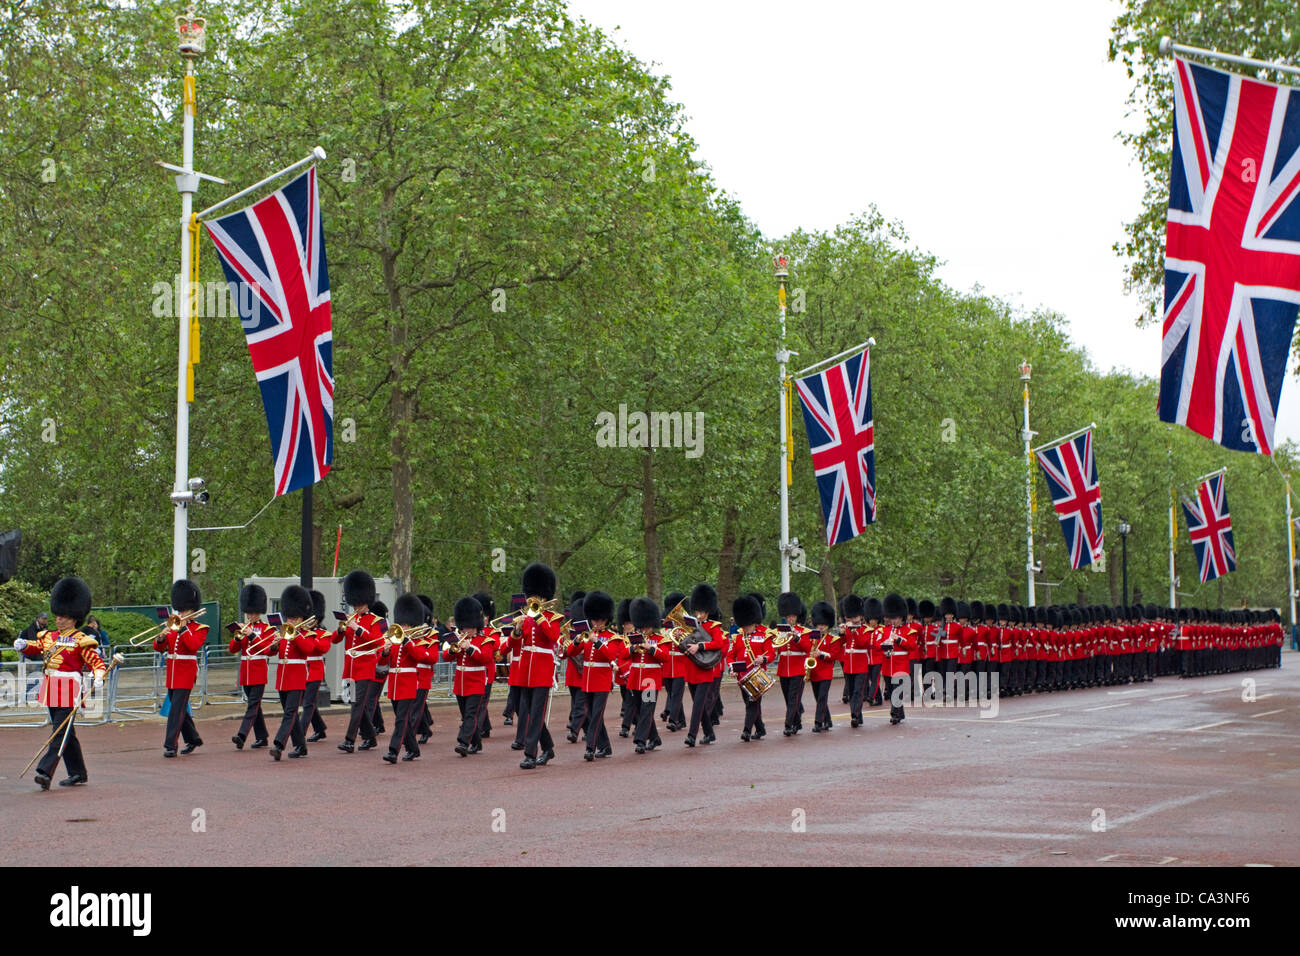 Soldiers from the Household Division march to the Trooping the Colour Major General's Review on Horse Guards Parade, The Mall, London, England, Saturday, June 02, 2012. The 1st. Battalion Coldstream Guards are Trooping their Colour in 2012 Stock Photo